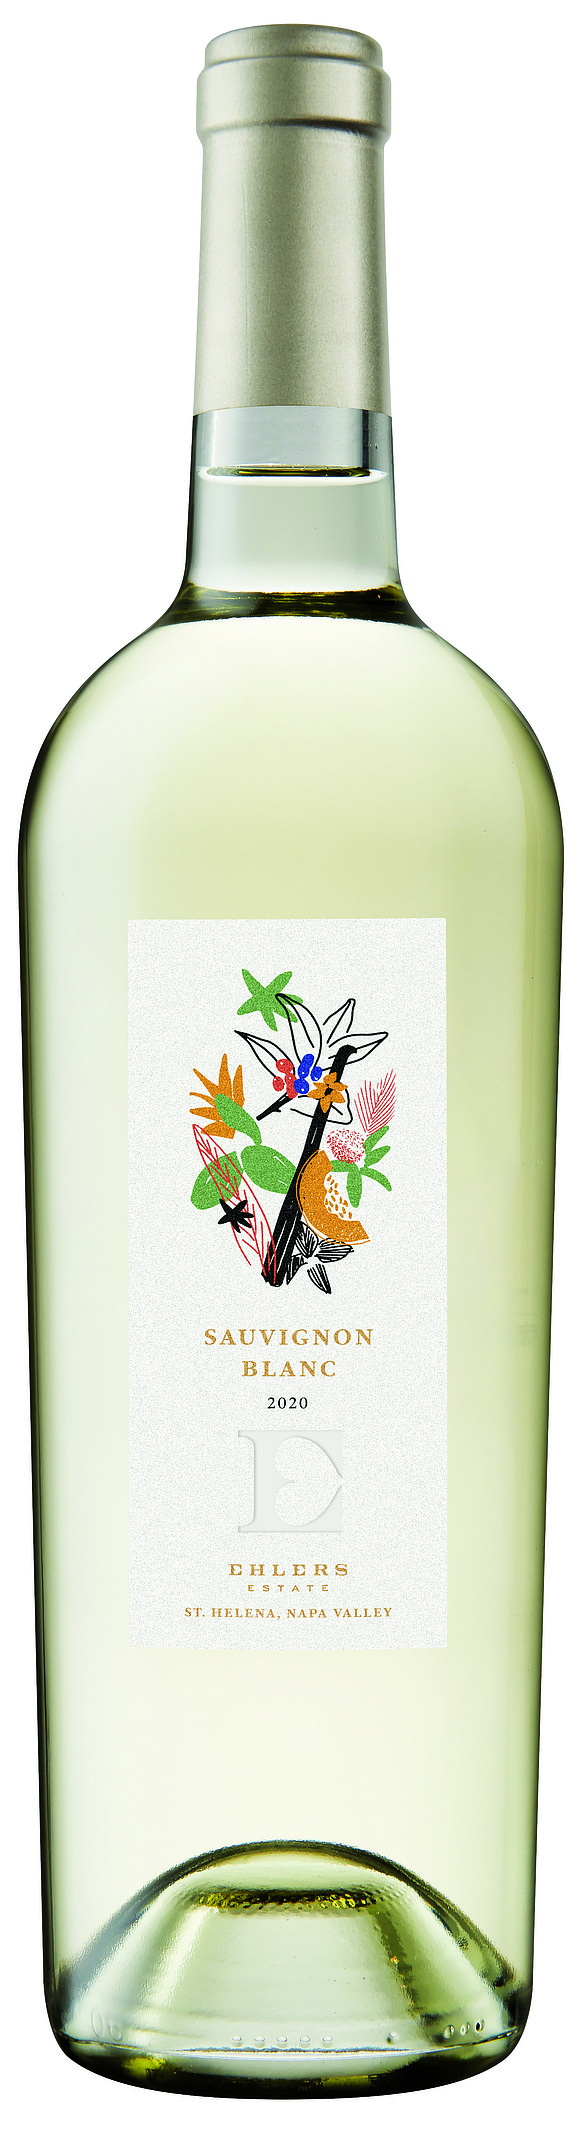 Product Image for Ehlers Sauvignon Blanc 